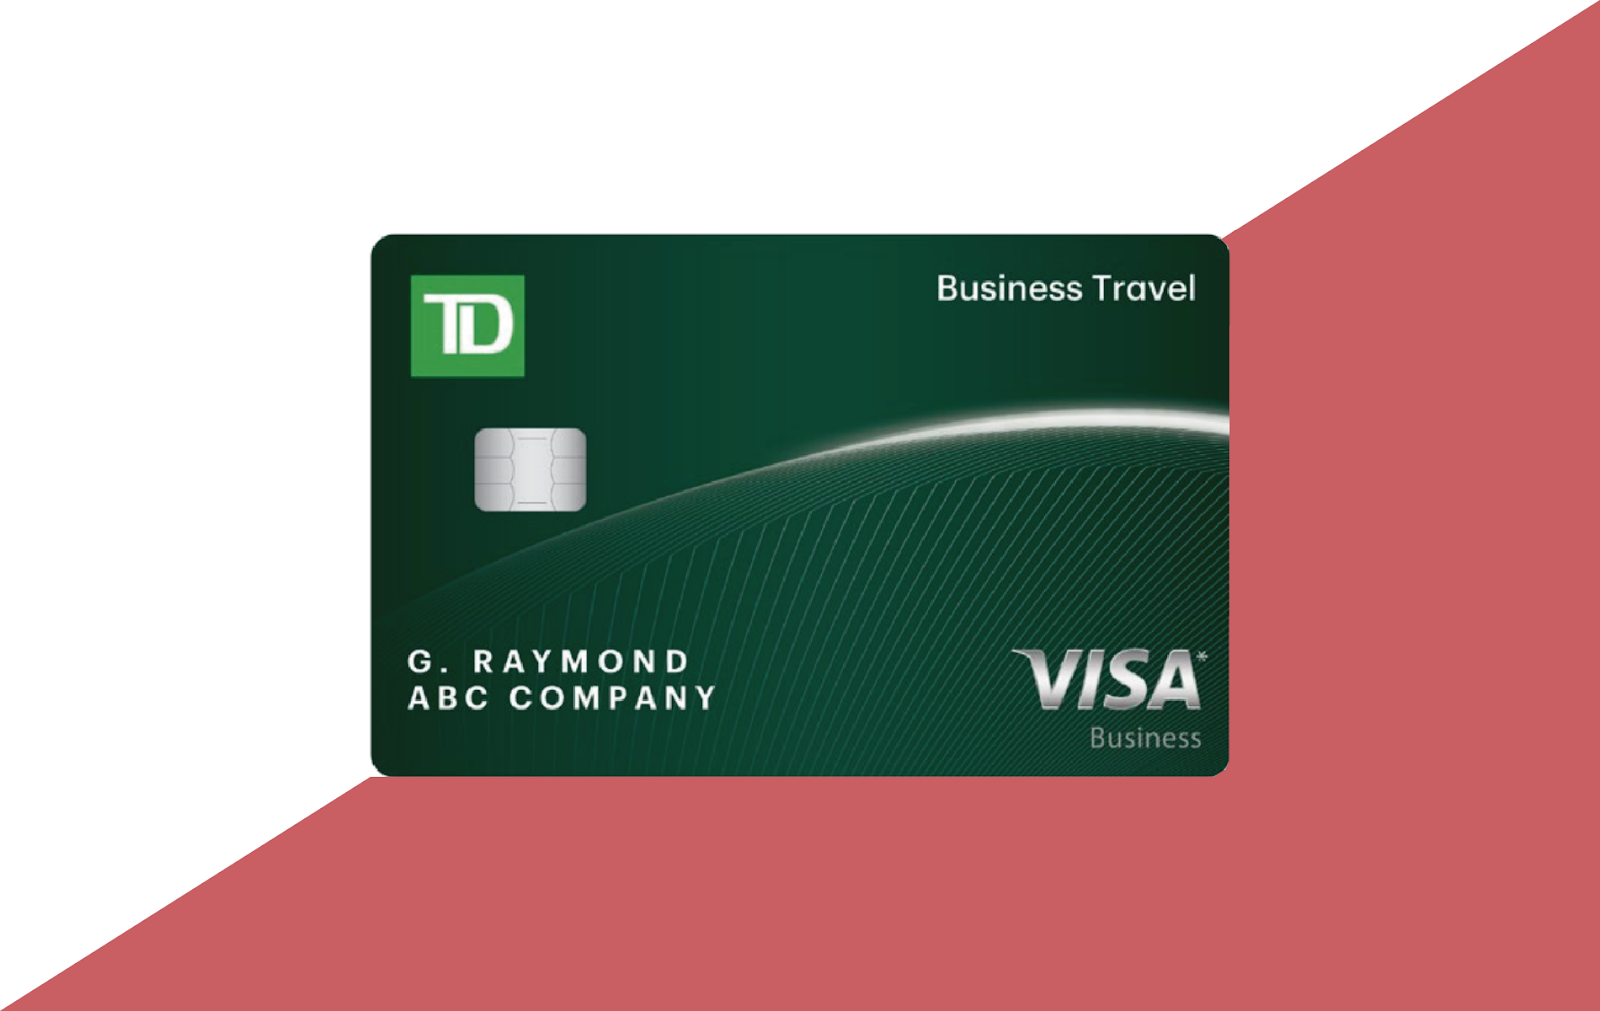 Best TD Credit Cards Canada TD Business Travel Visa Card - Best for business travel reward points